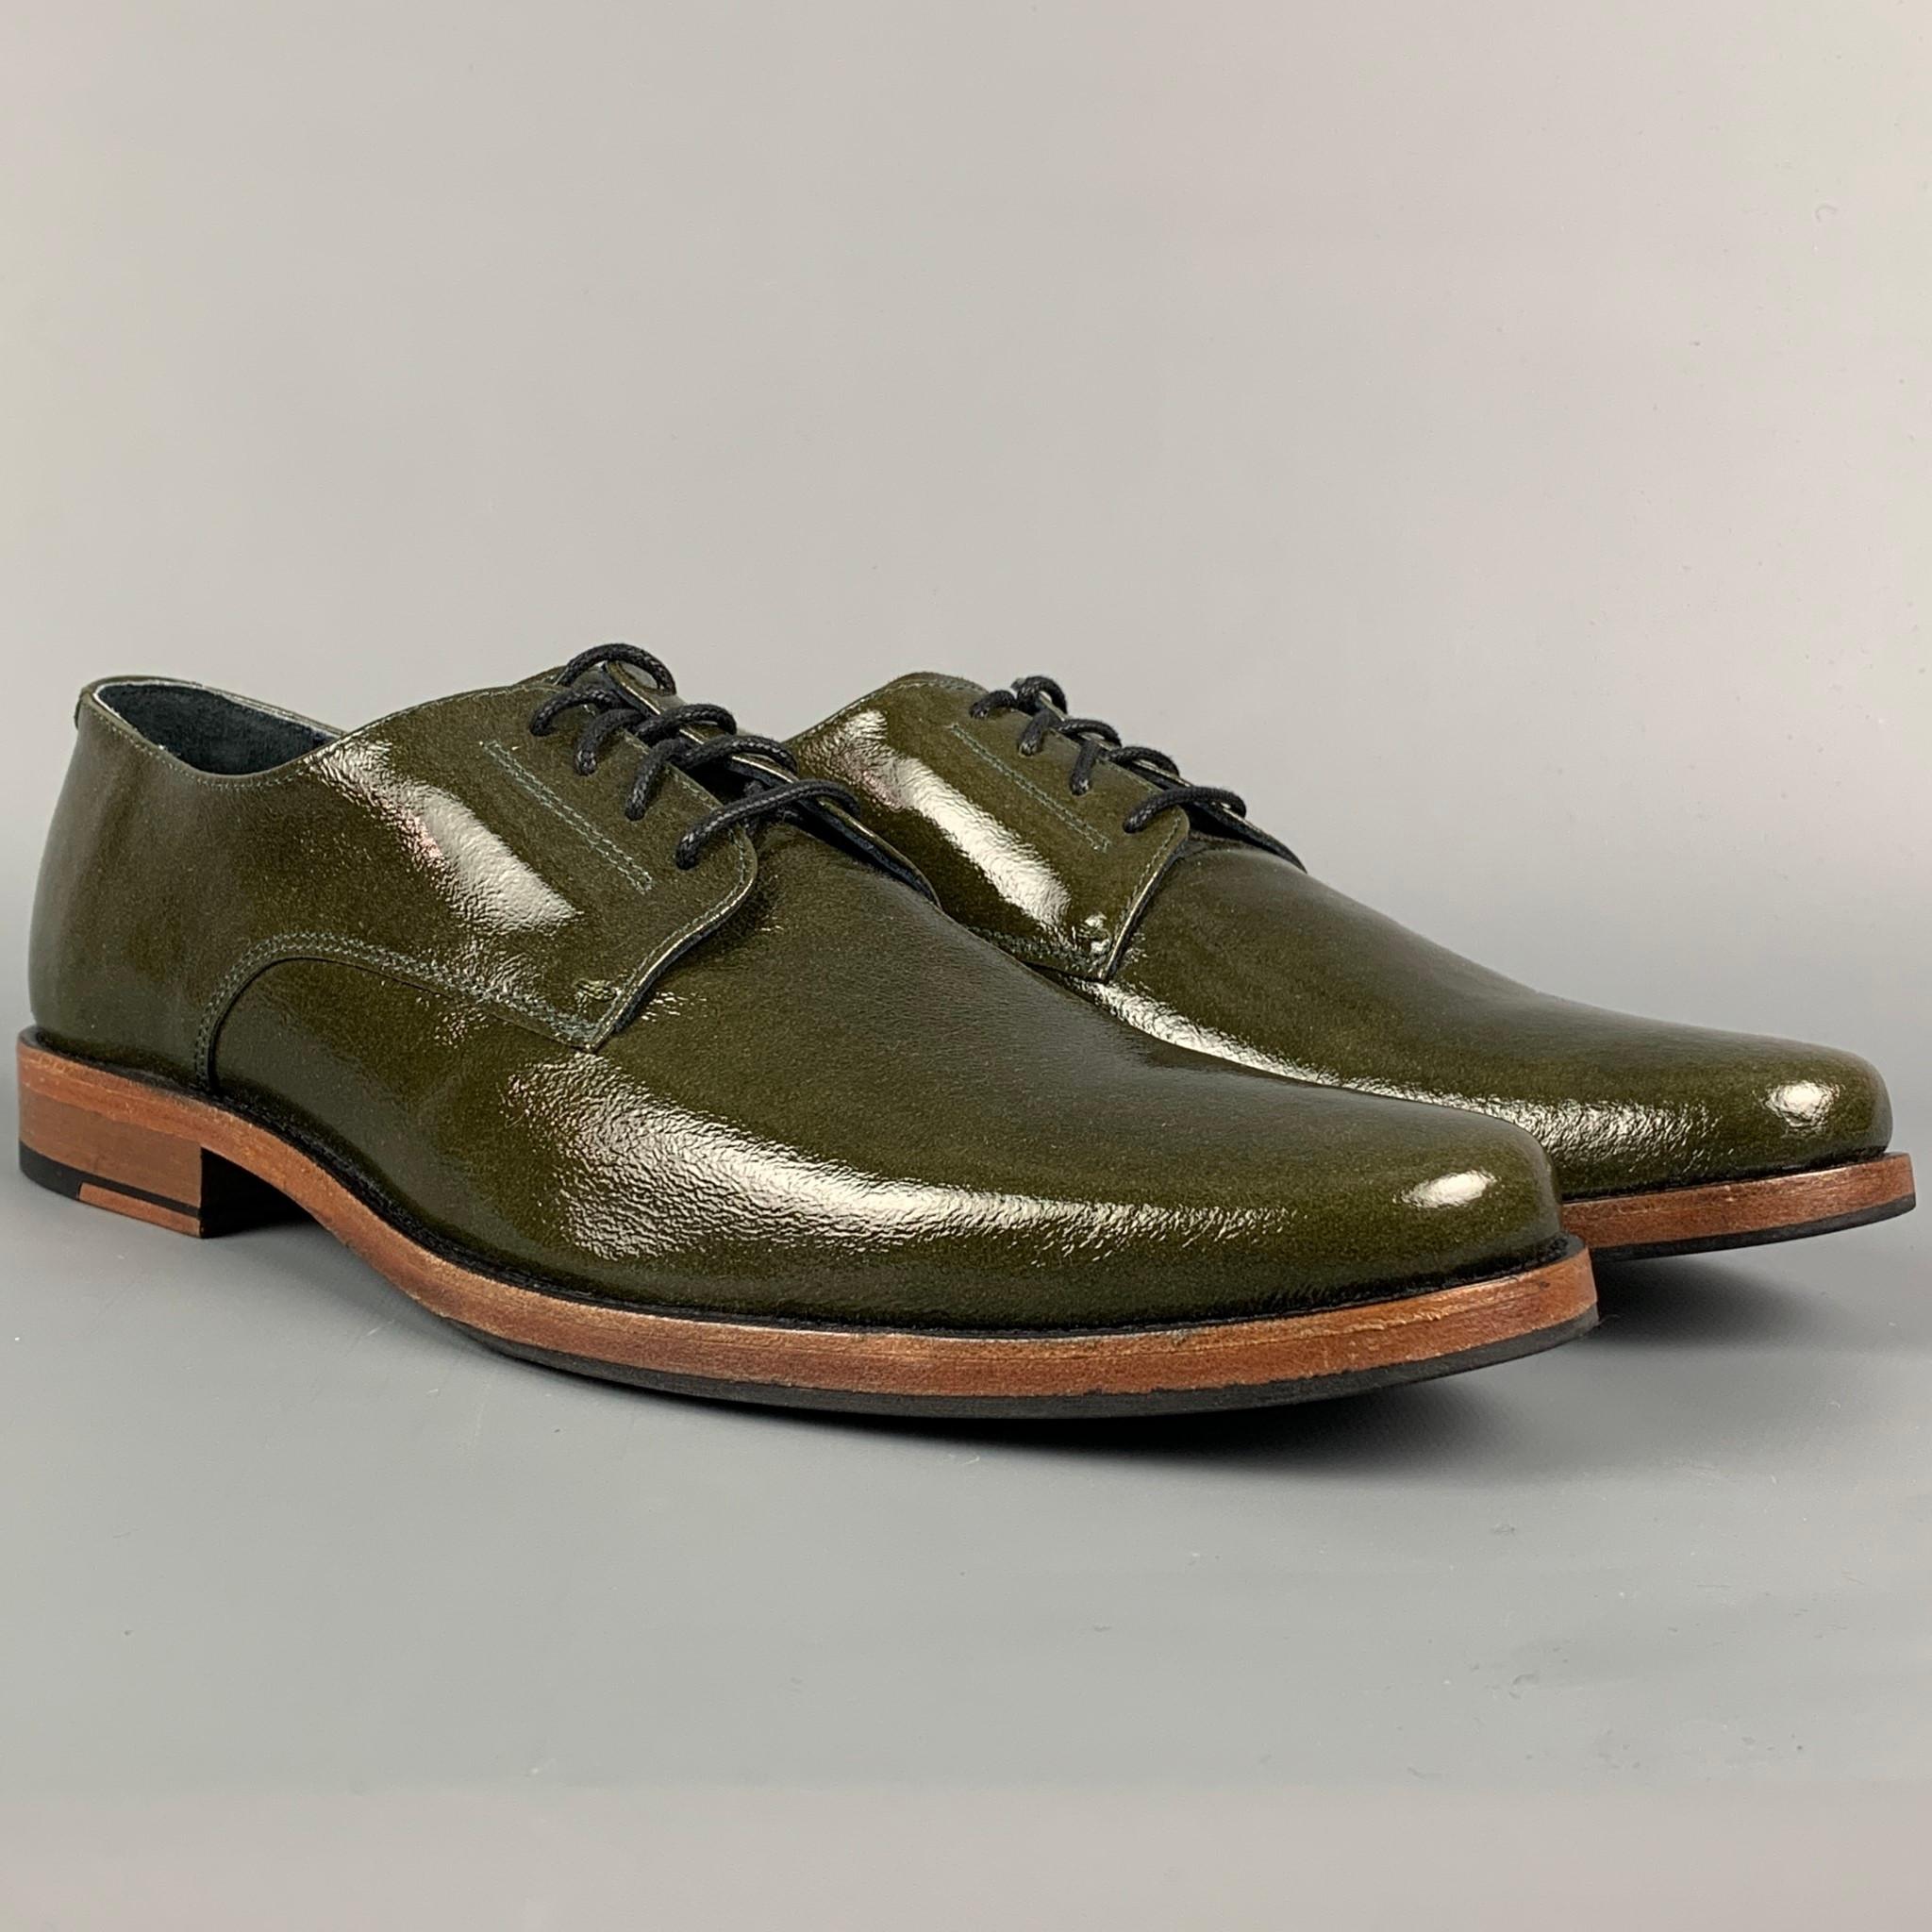 THE GENERIC MAN shoes comes in a olive patent leather featuring a round toe and a lace up closure. Made in Portugal. 

Excellent Pre-Owned Condition.
Marked: 43

Outsole: 12.25 in. x 4 in. 